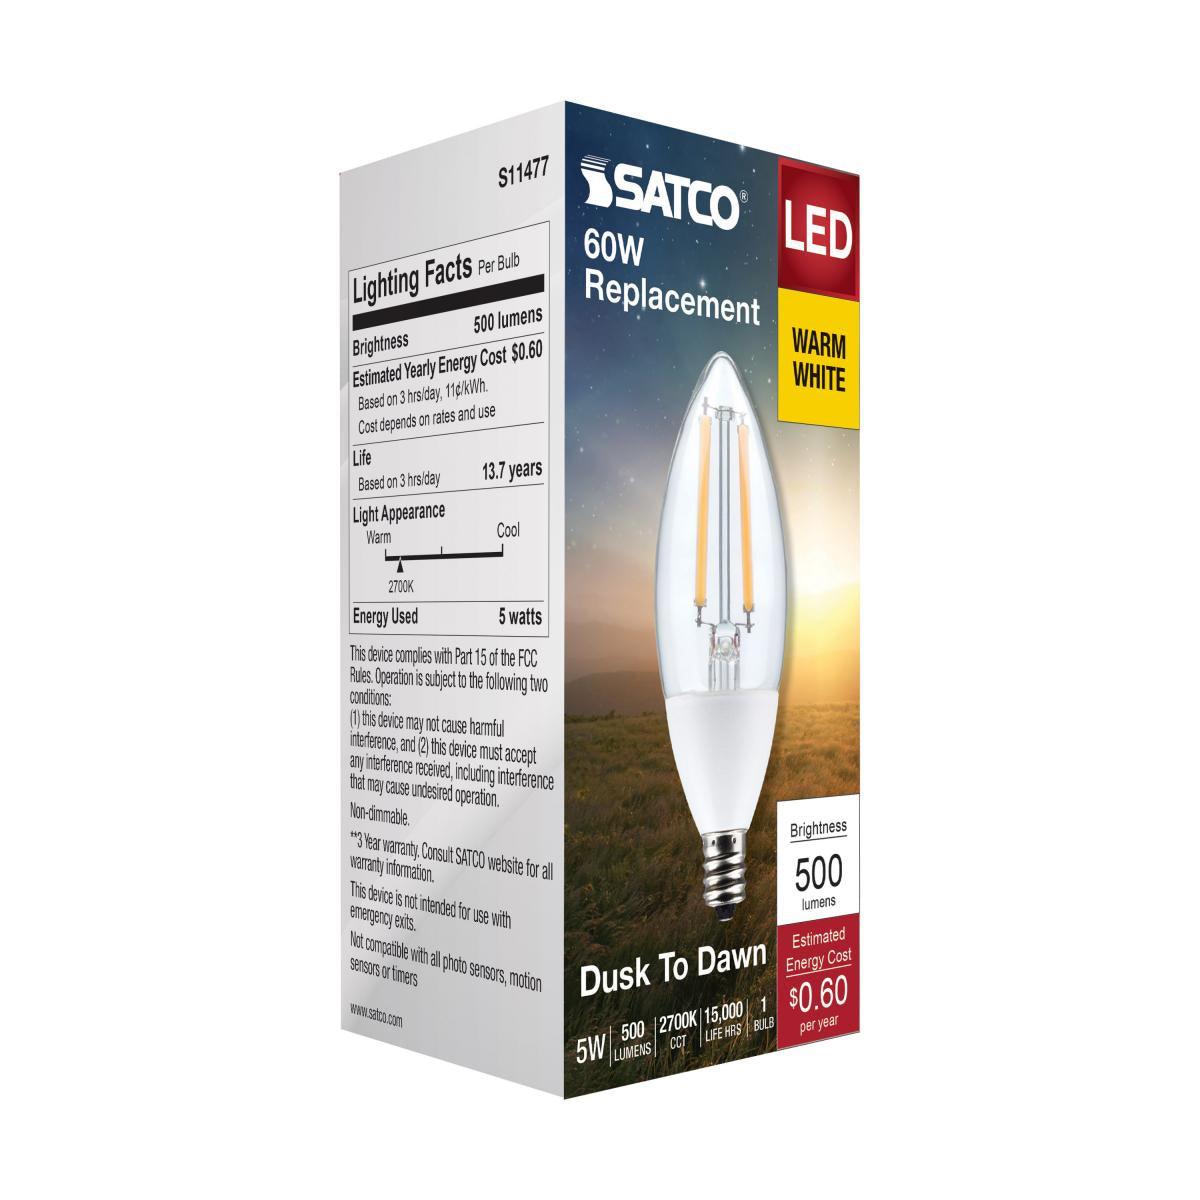 B11 Candle Filament LED Bulb, 40W Equivalent,5 Watt, 500 Lumens, 2700K, E12 Candelabra Base, Clear Finish, With Photocell - Bees Lighting